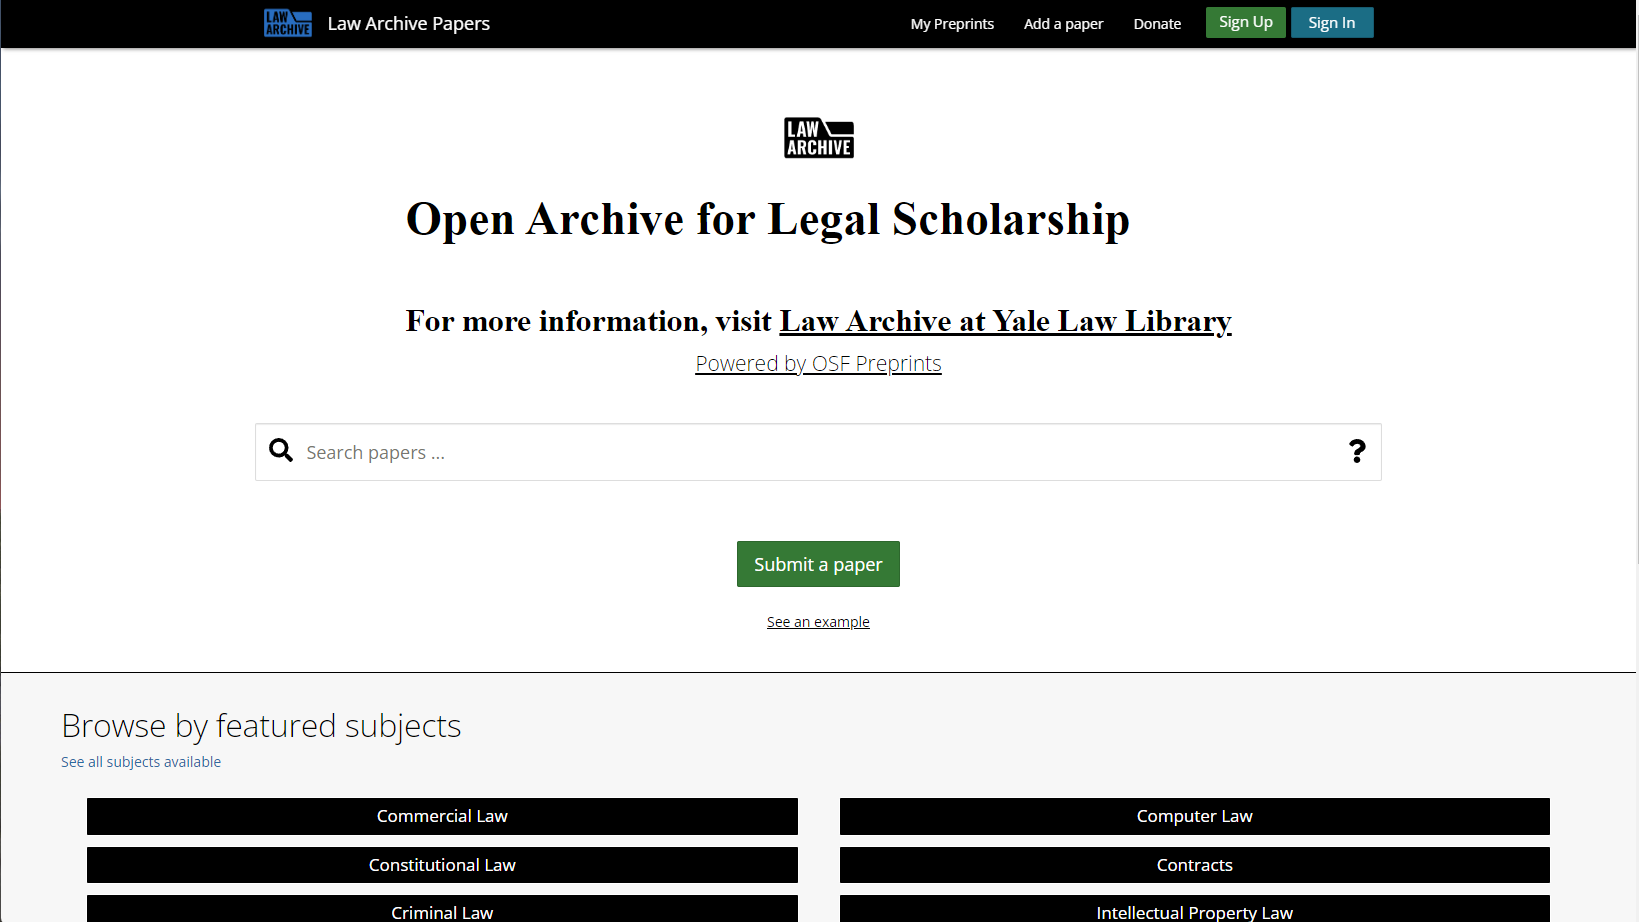 With Goal of Promoting Open Access to Legal Scholarship, Yale Law School Launches Law Archive